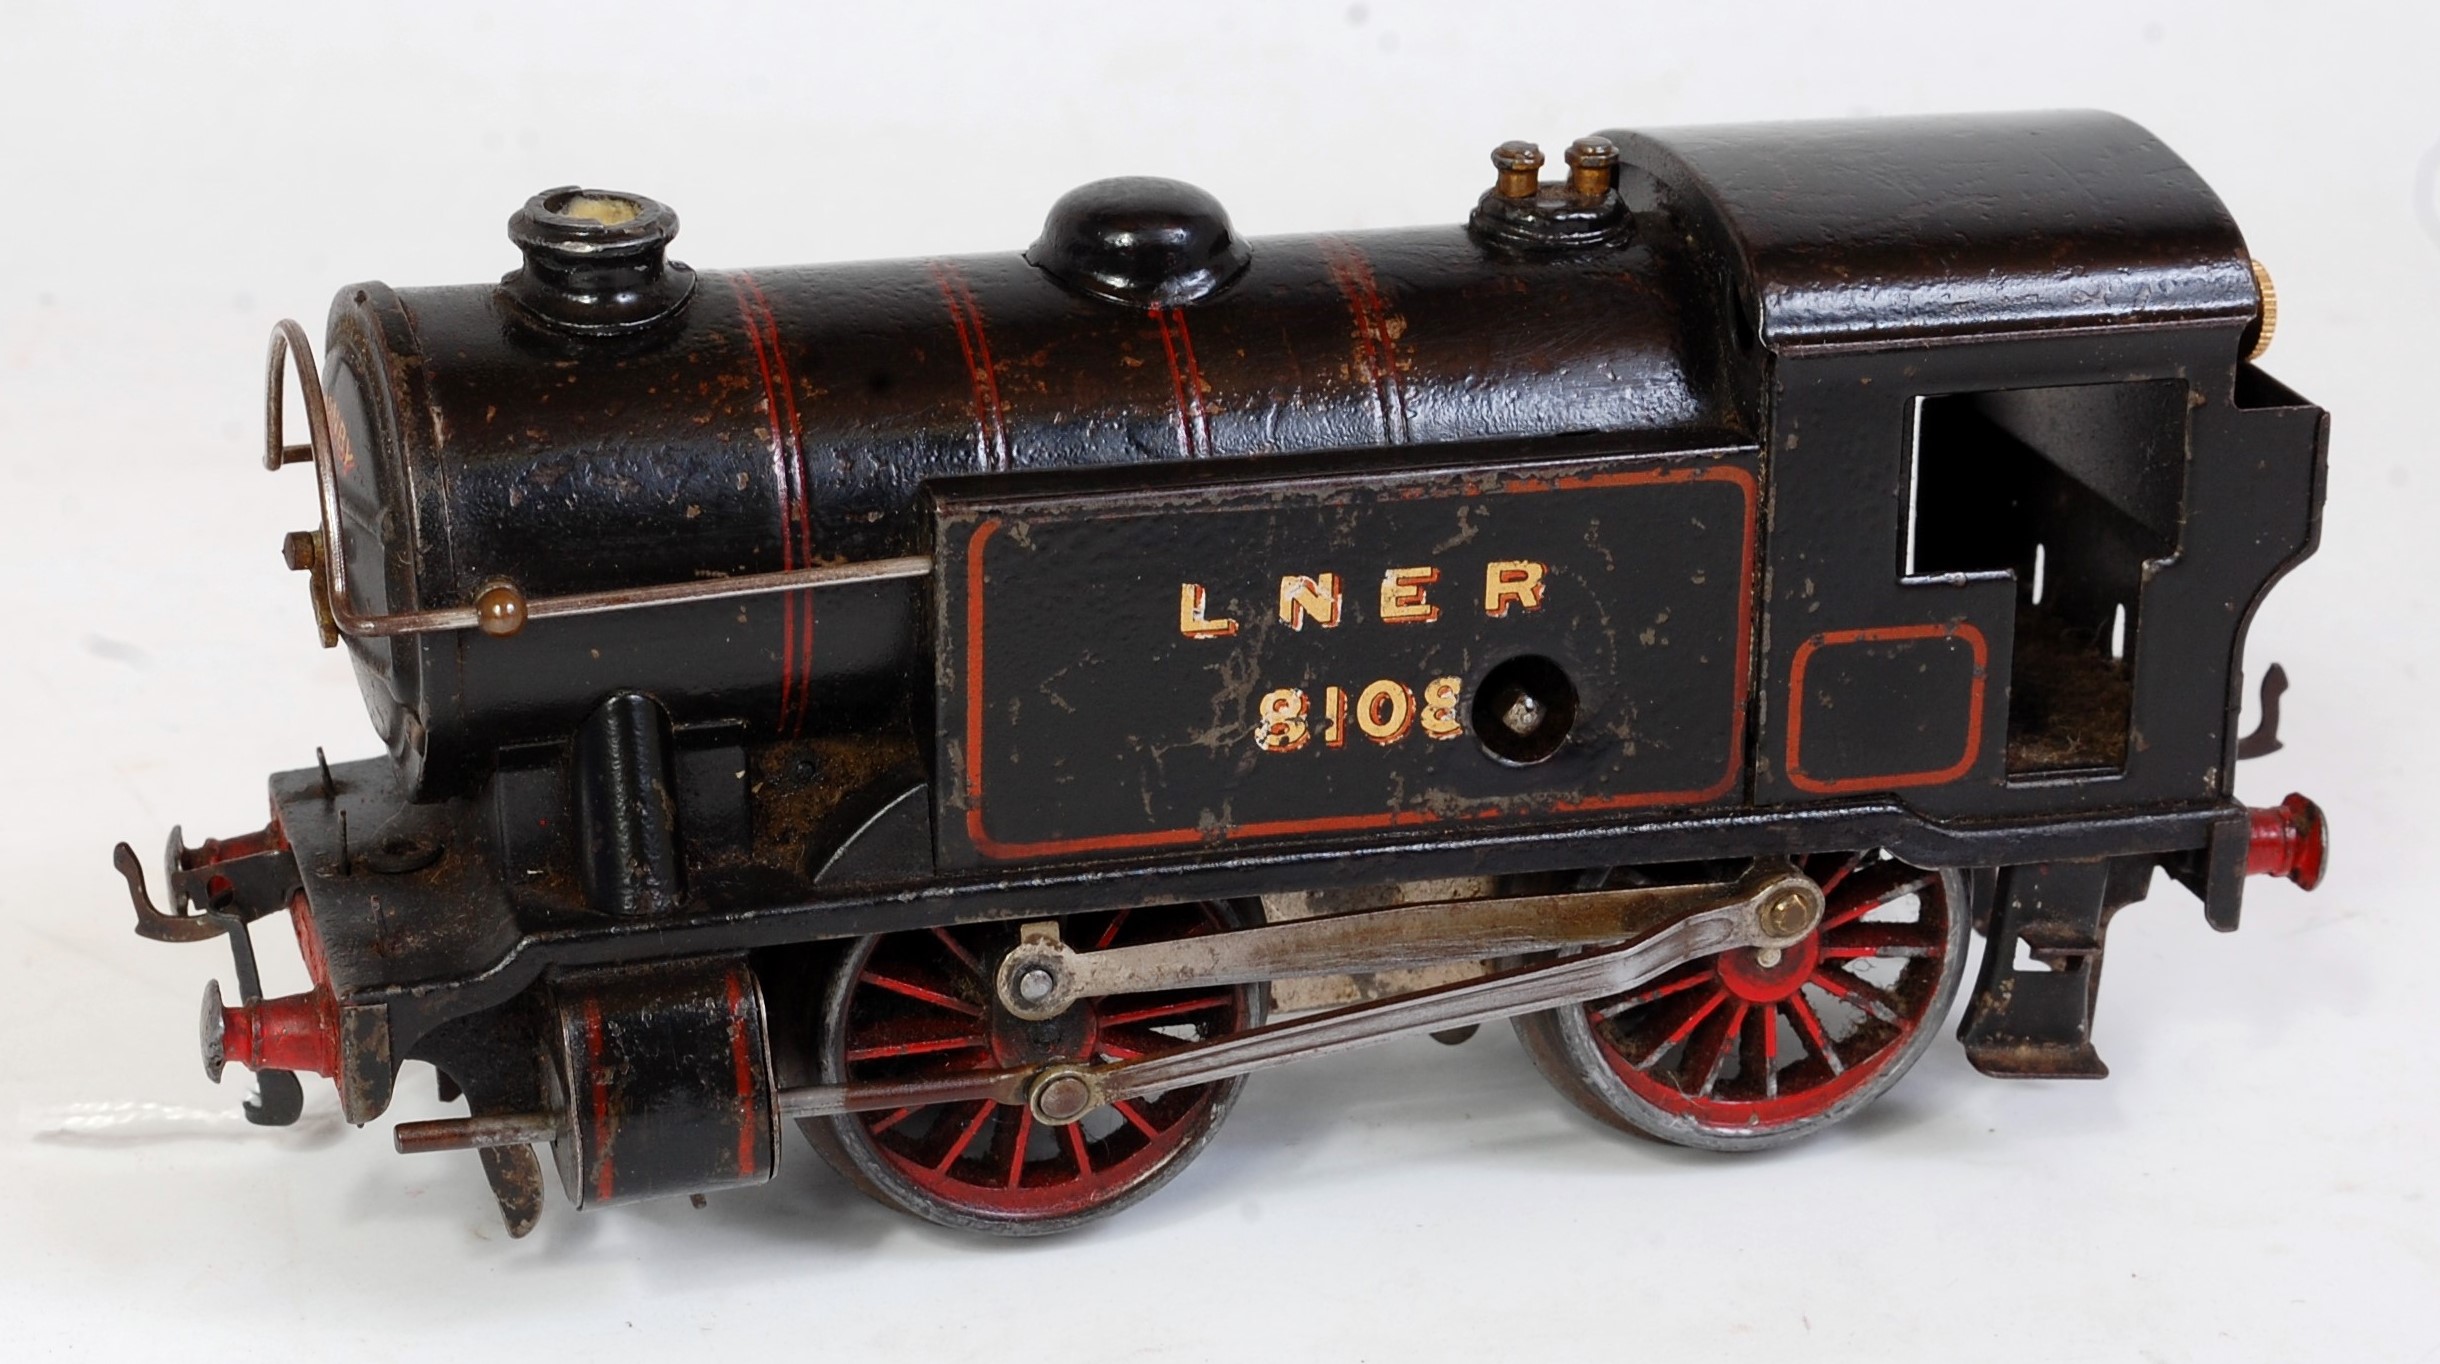 Hornby 1929/30 black LNER c/w No. 1 special tank loco No. 8108 - considerable re-touching, rear